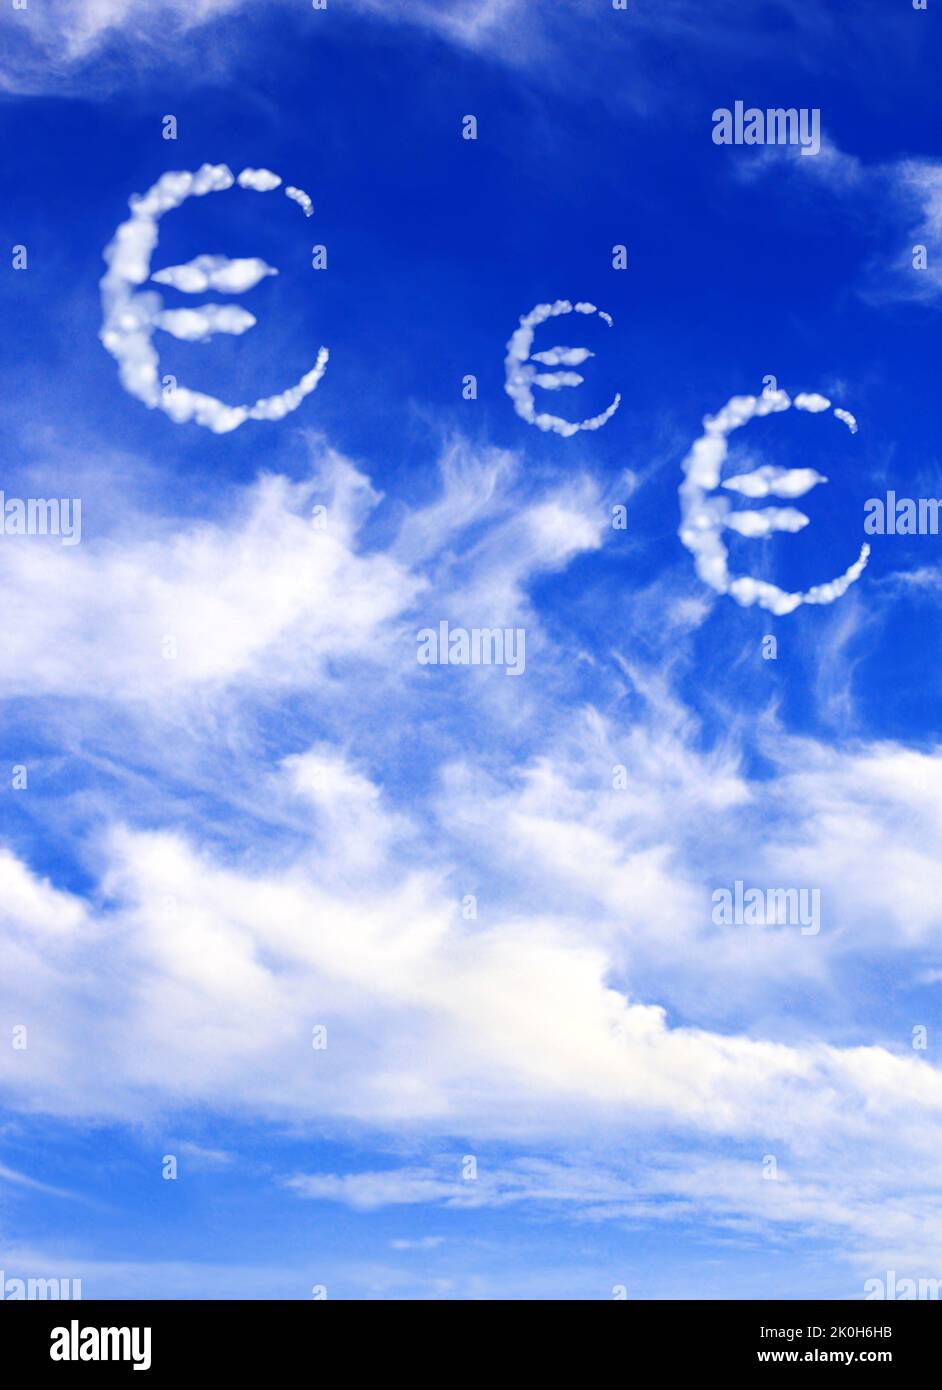 Money making. Euro sign in the clouds. Cloud shaped as european currency symbols. Euro symbol made of cloud. Business, development and prosperity conc Stock Photo